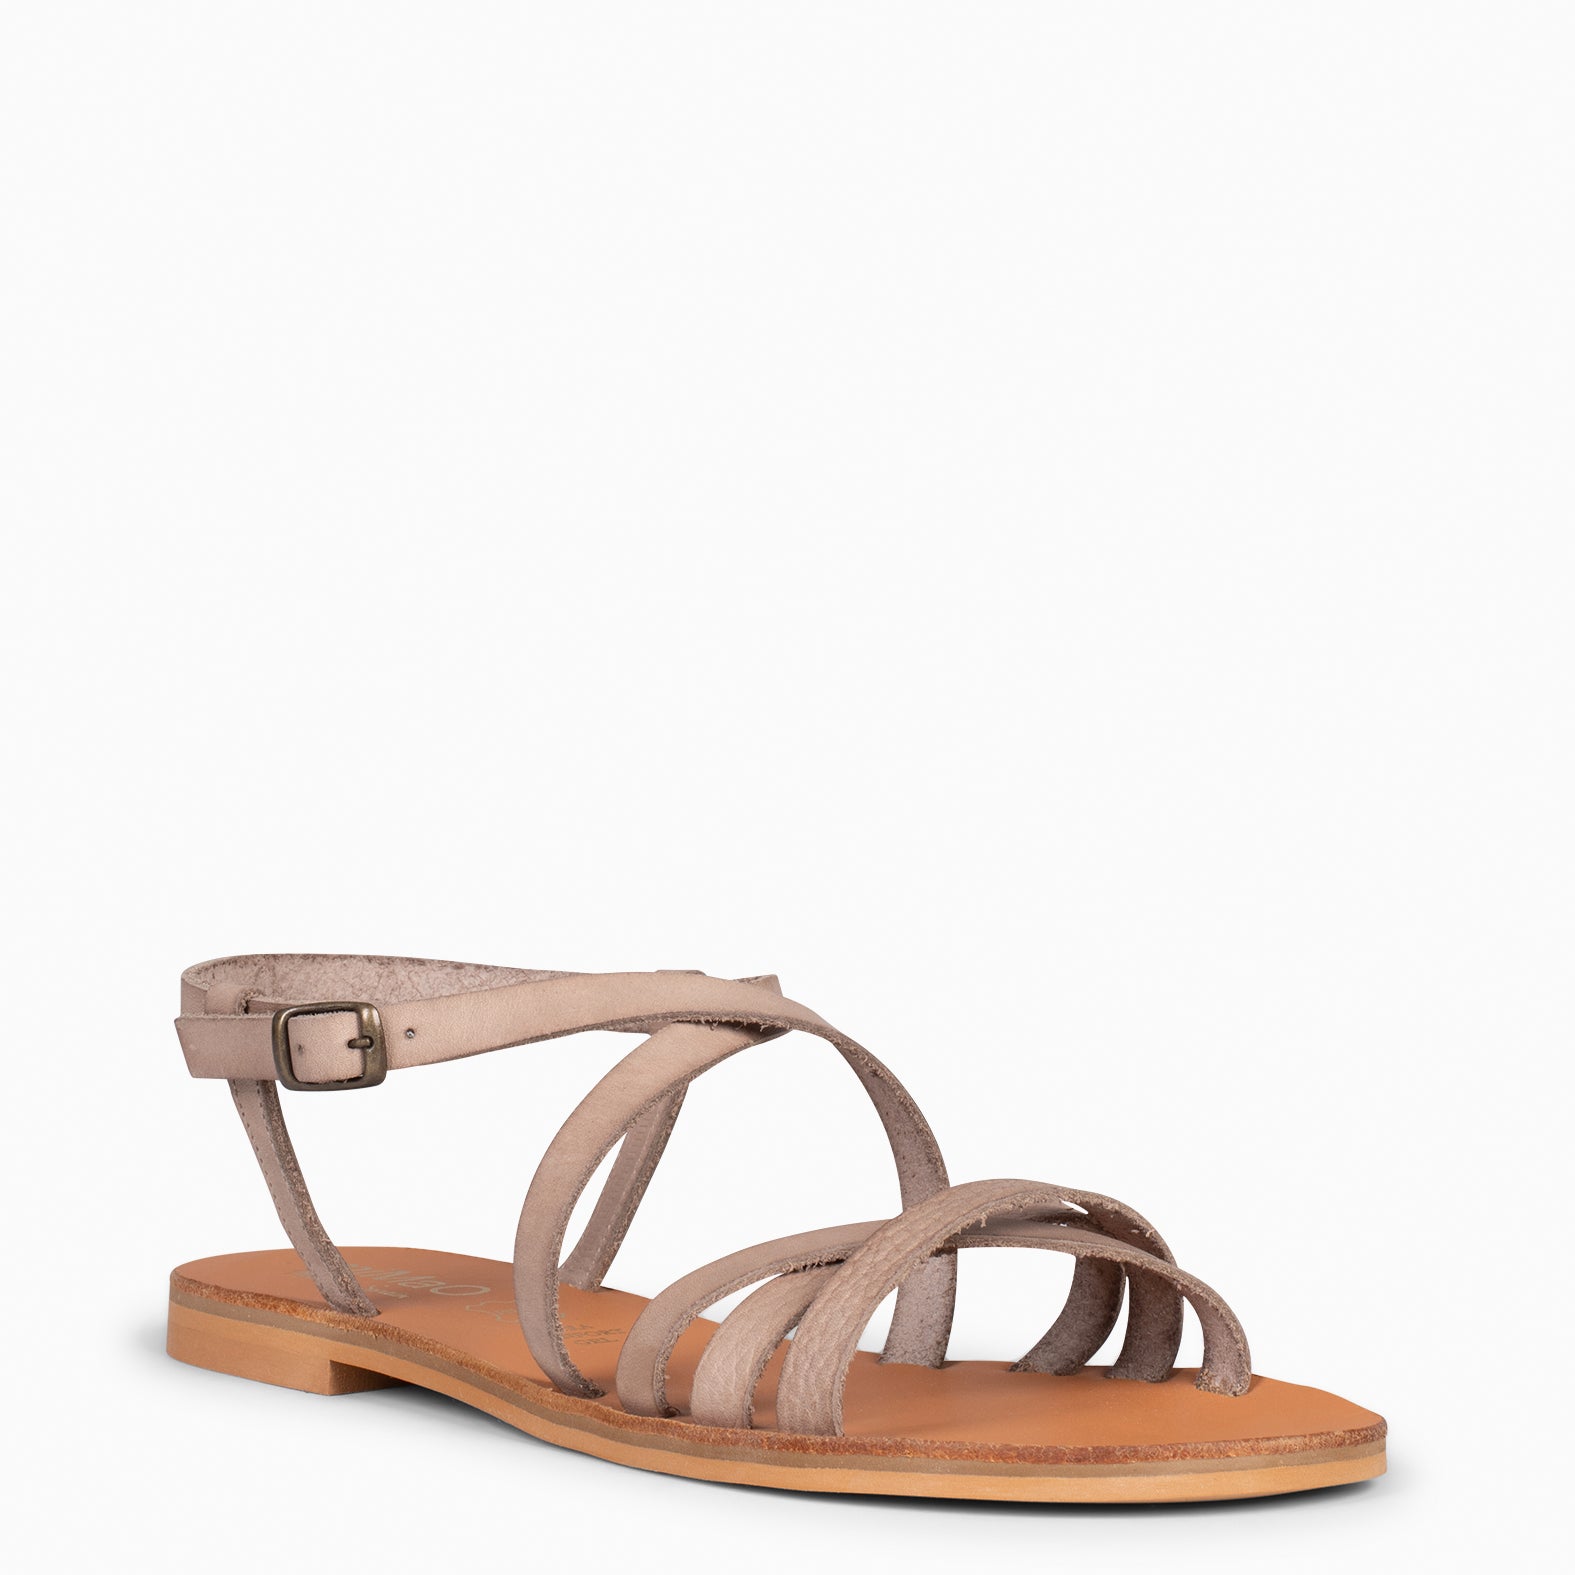 IXORA – TAUPE flat sandals with buckle